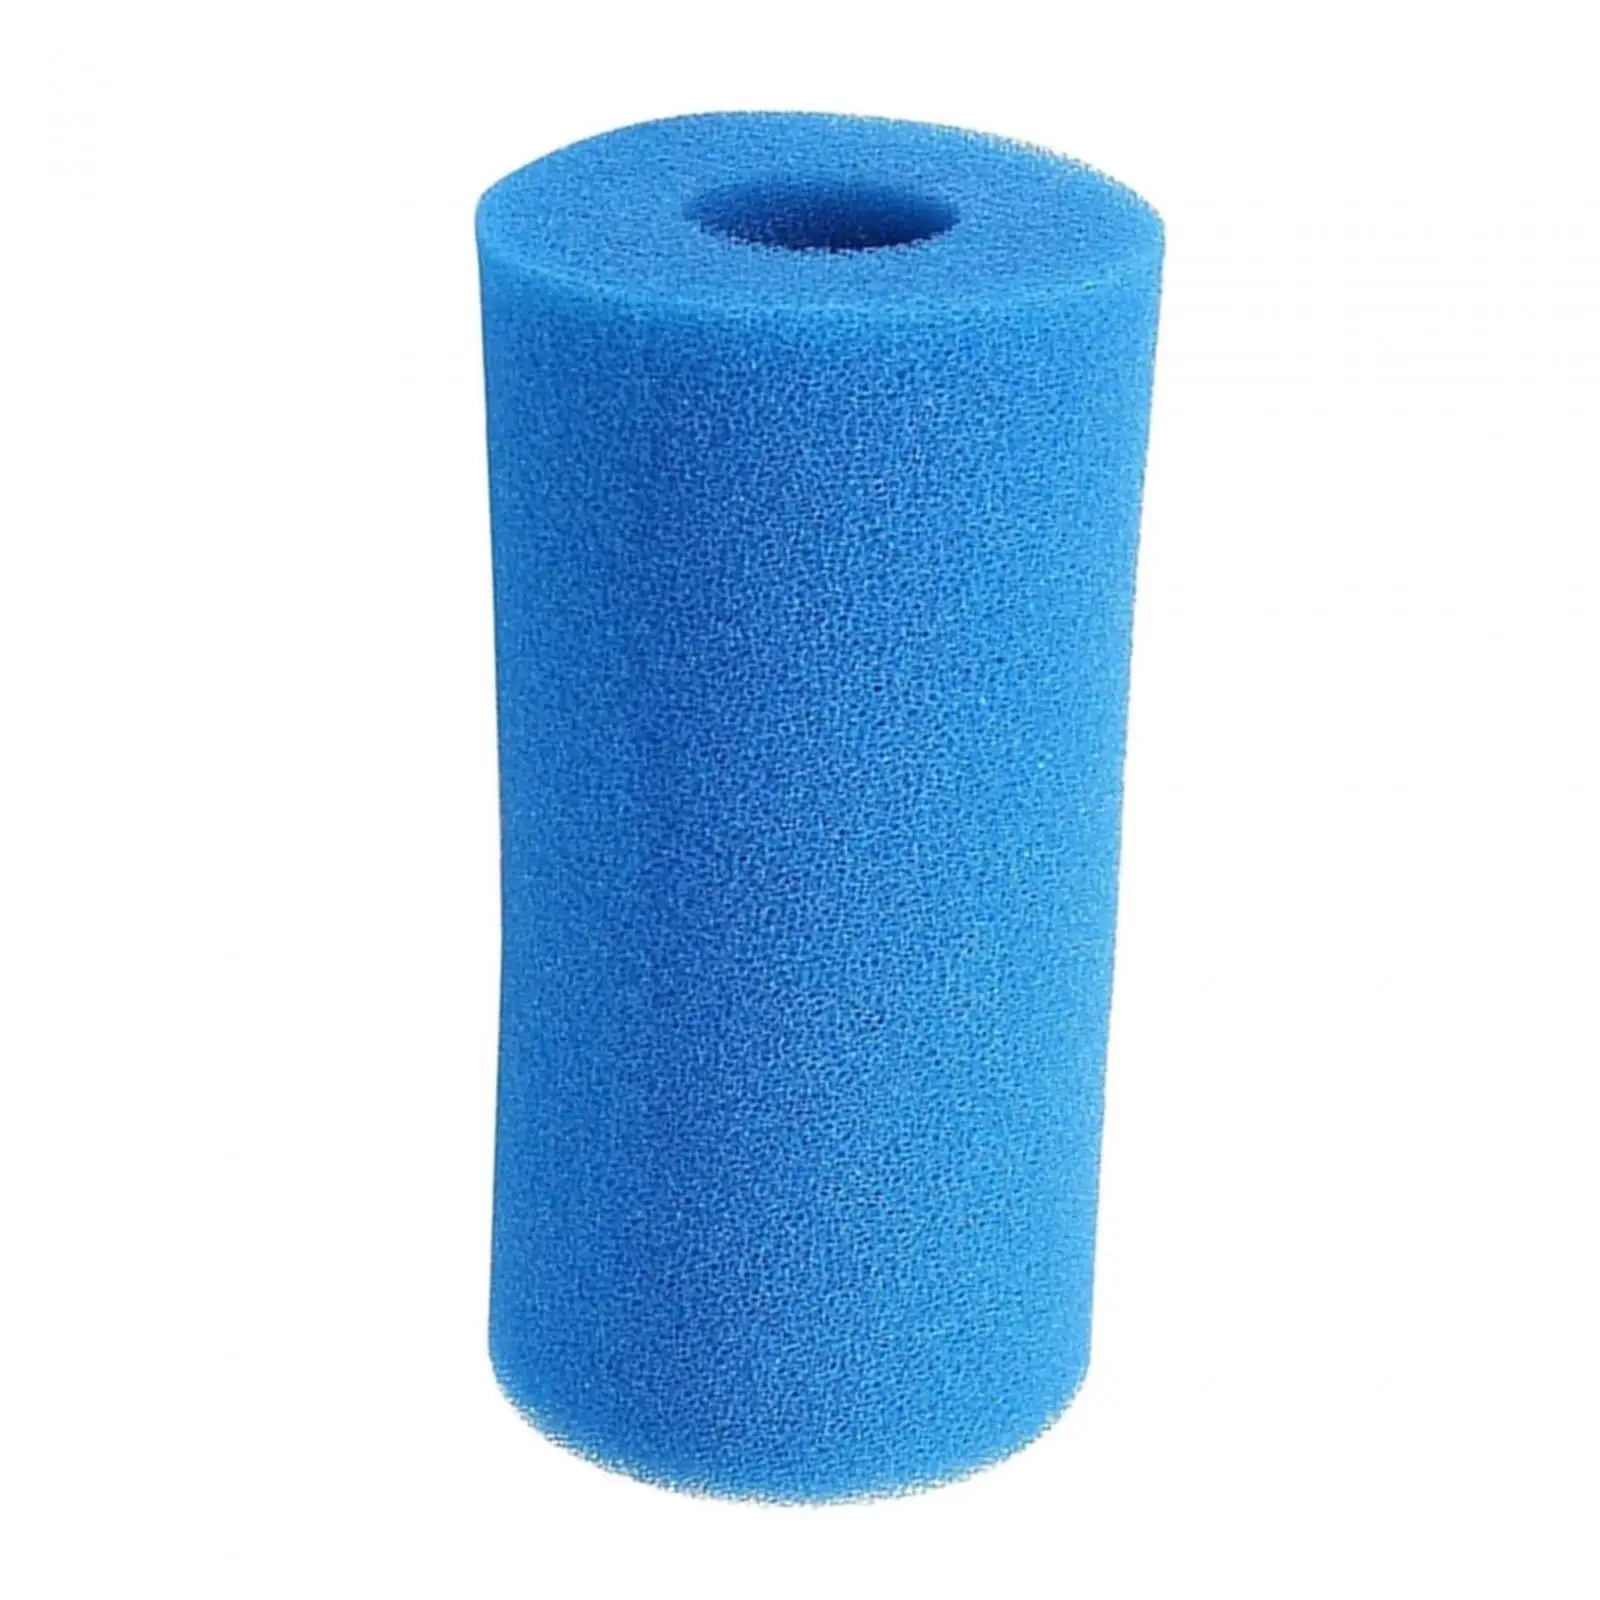 Pool Filter Cartridge Easy to Clean Reusable Cleaning Easy to Use Washable Directly Replace Reused for Type B Accessories